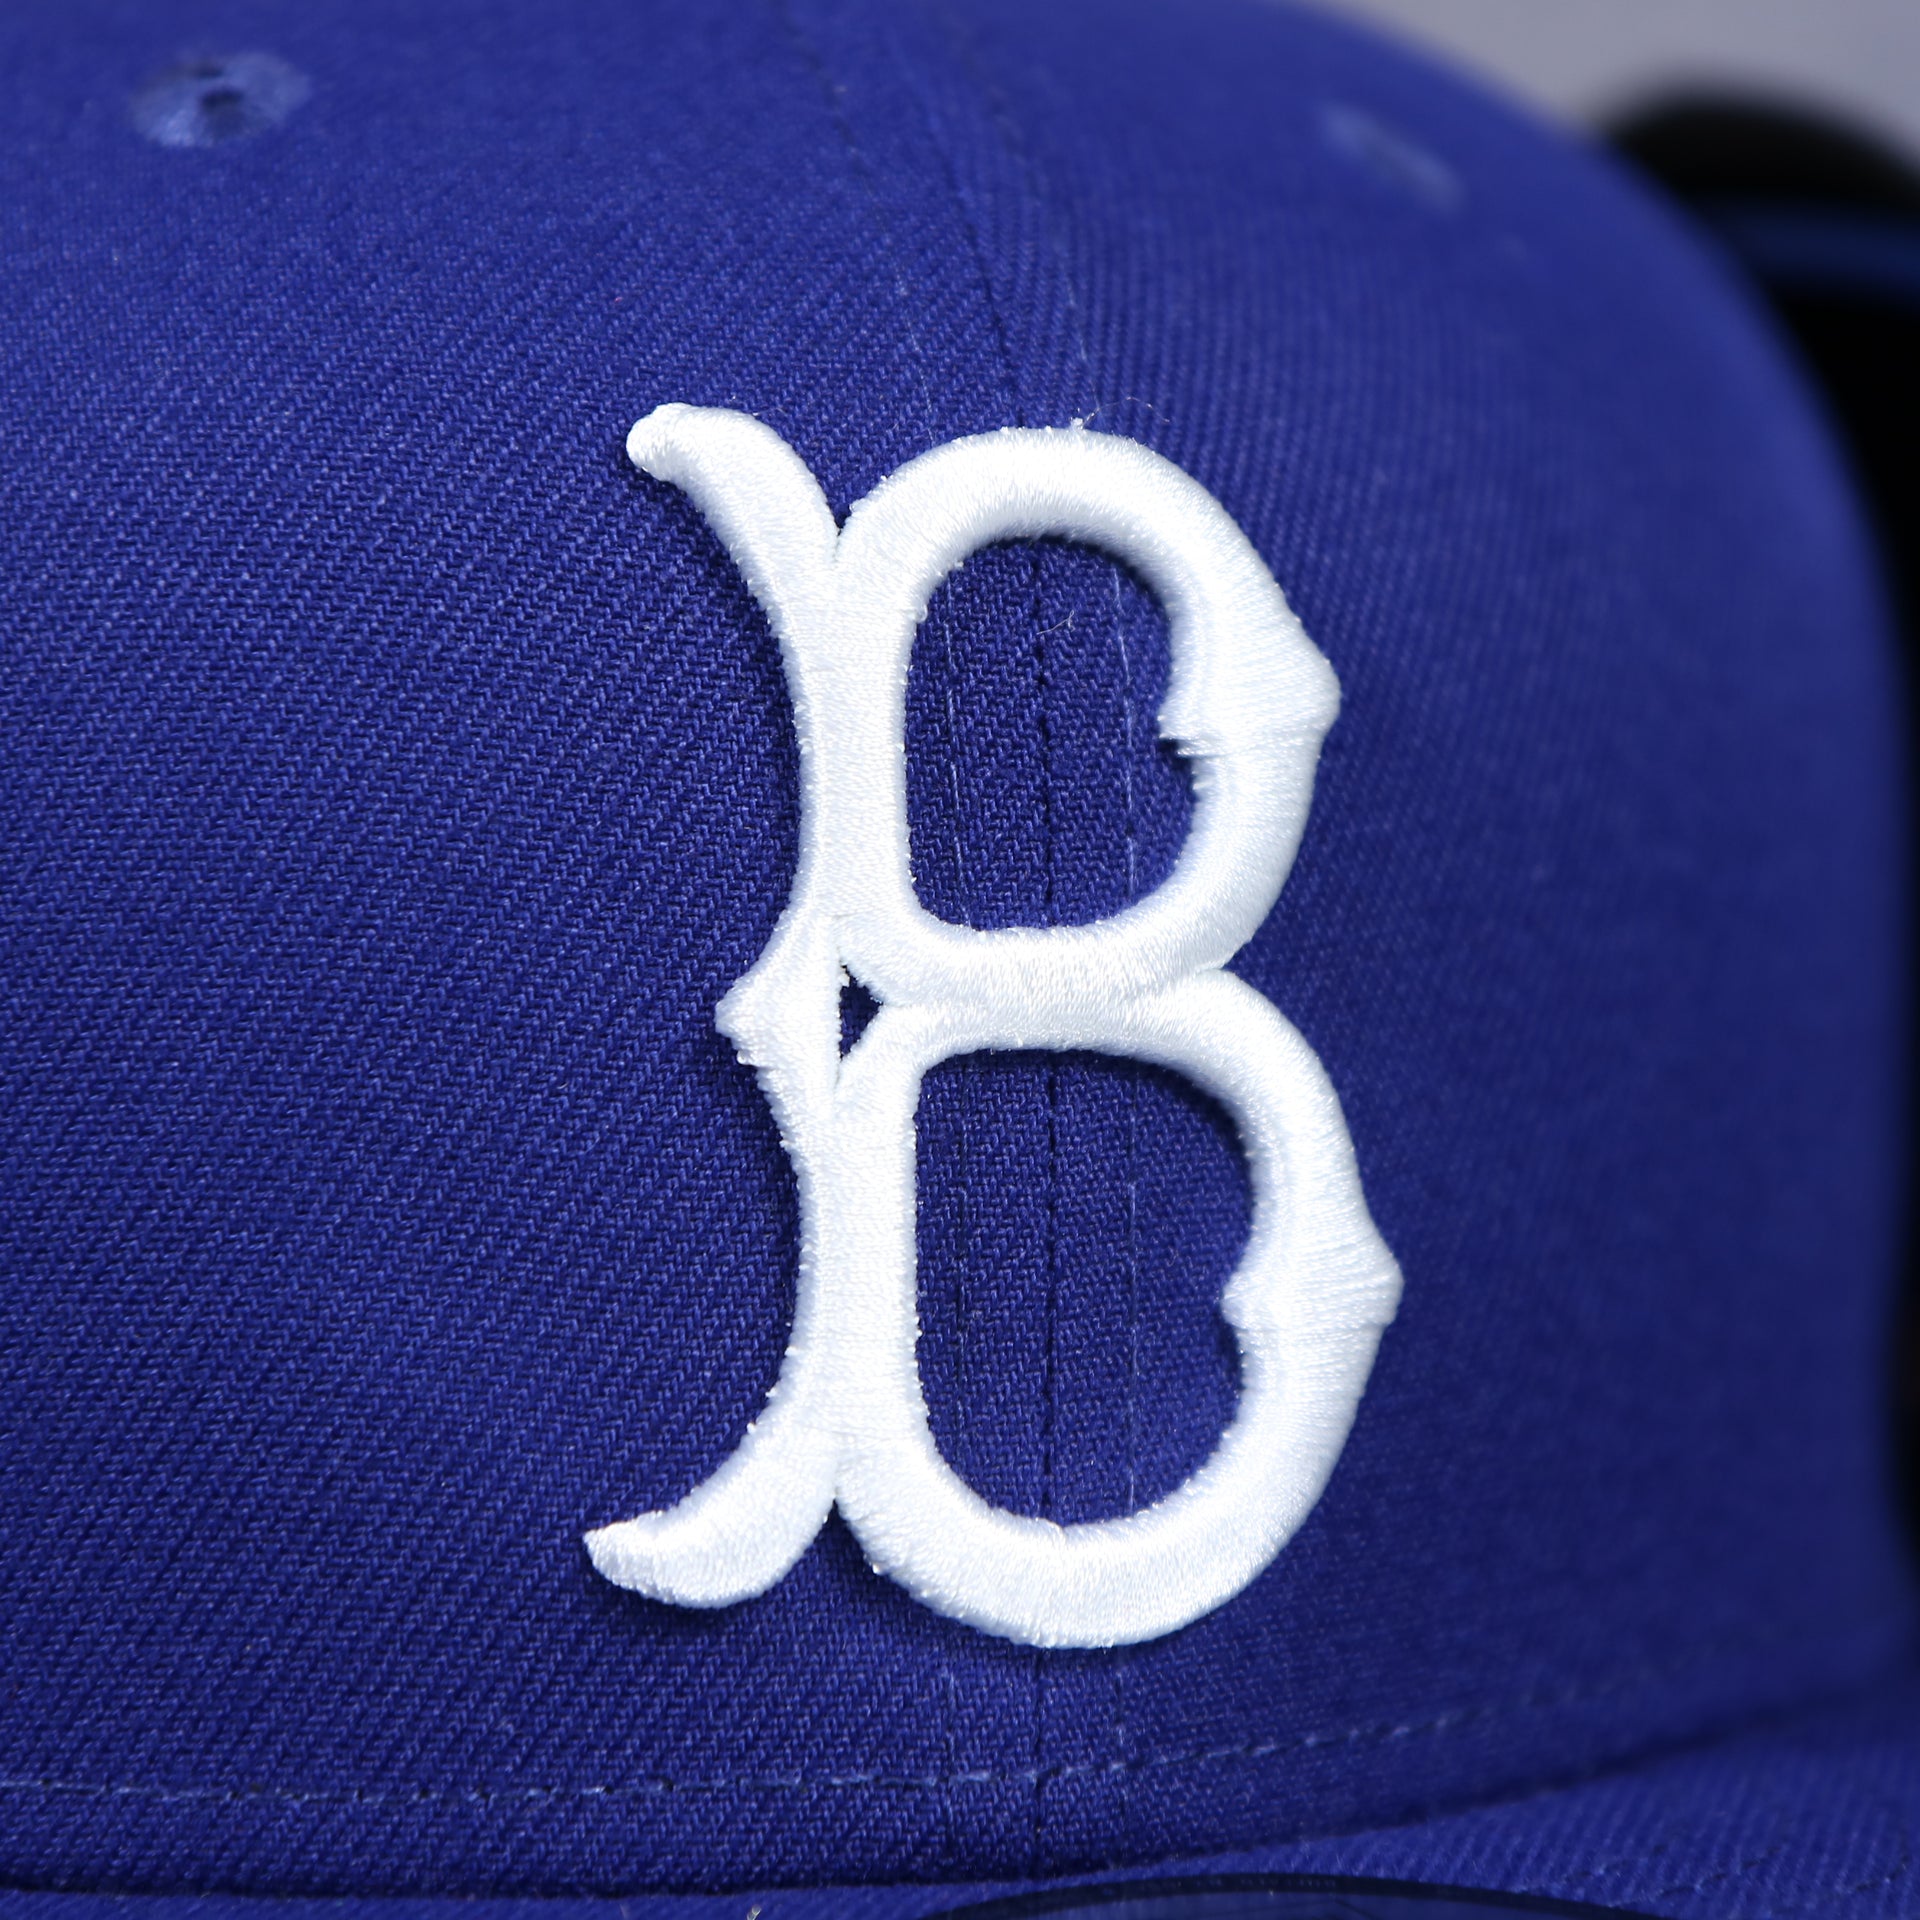 dodger logo on the front of the Brooklyn Dodgers Cooperstown Royal Blue 9Fifty Snapback Cap | OSFM